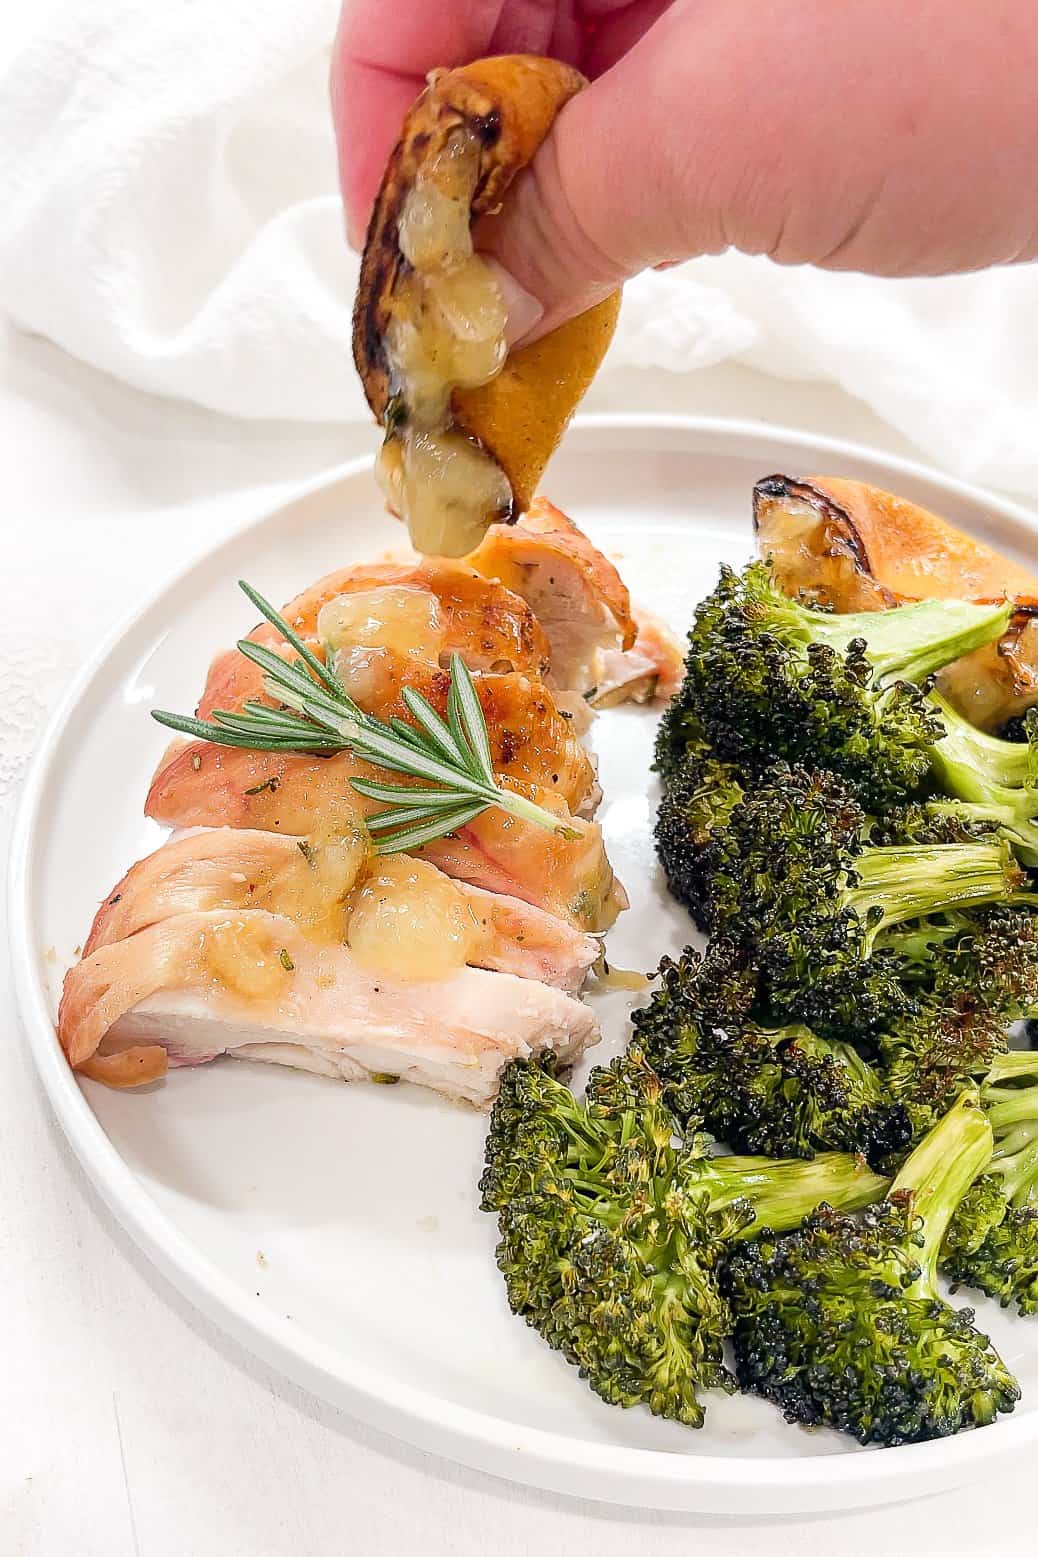 a hand squeezing a grilled lemon on top of sliced flattened chicken on a white plate next to a pile of roasted broccoli